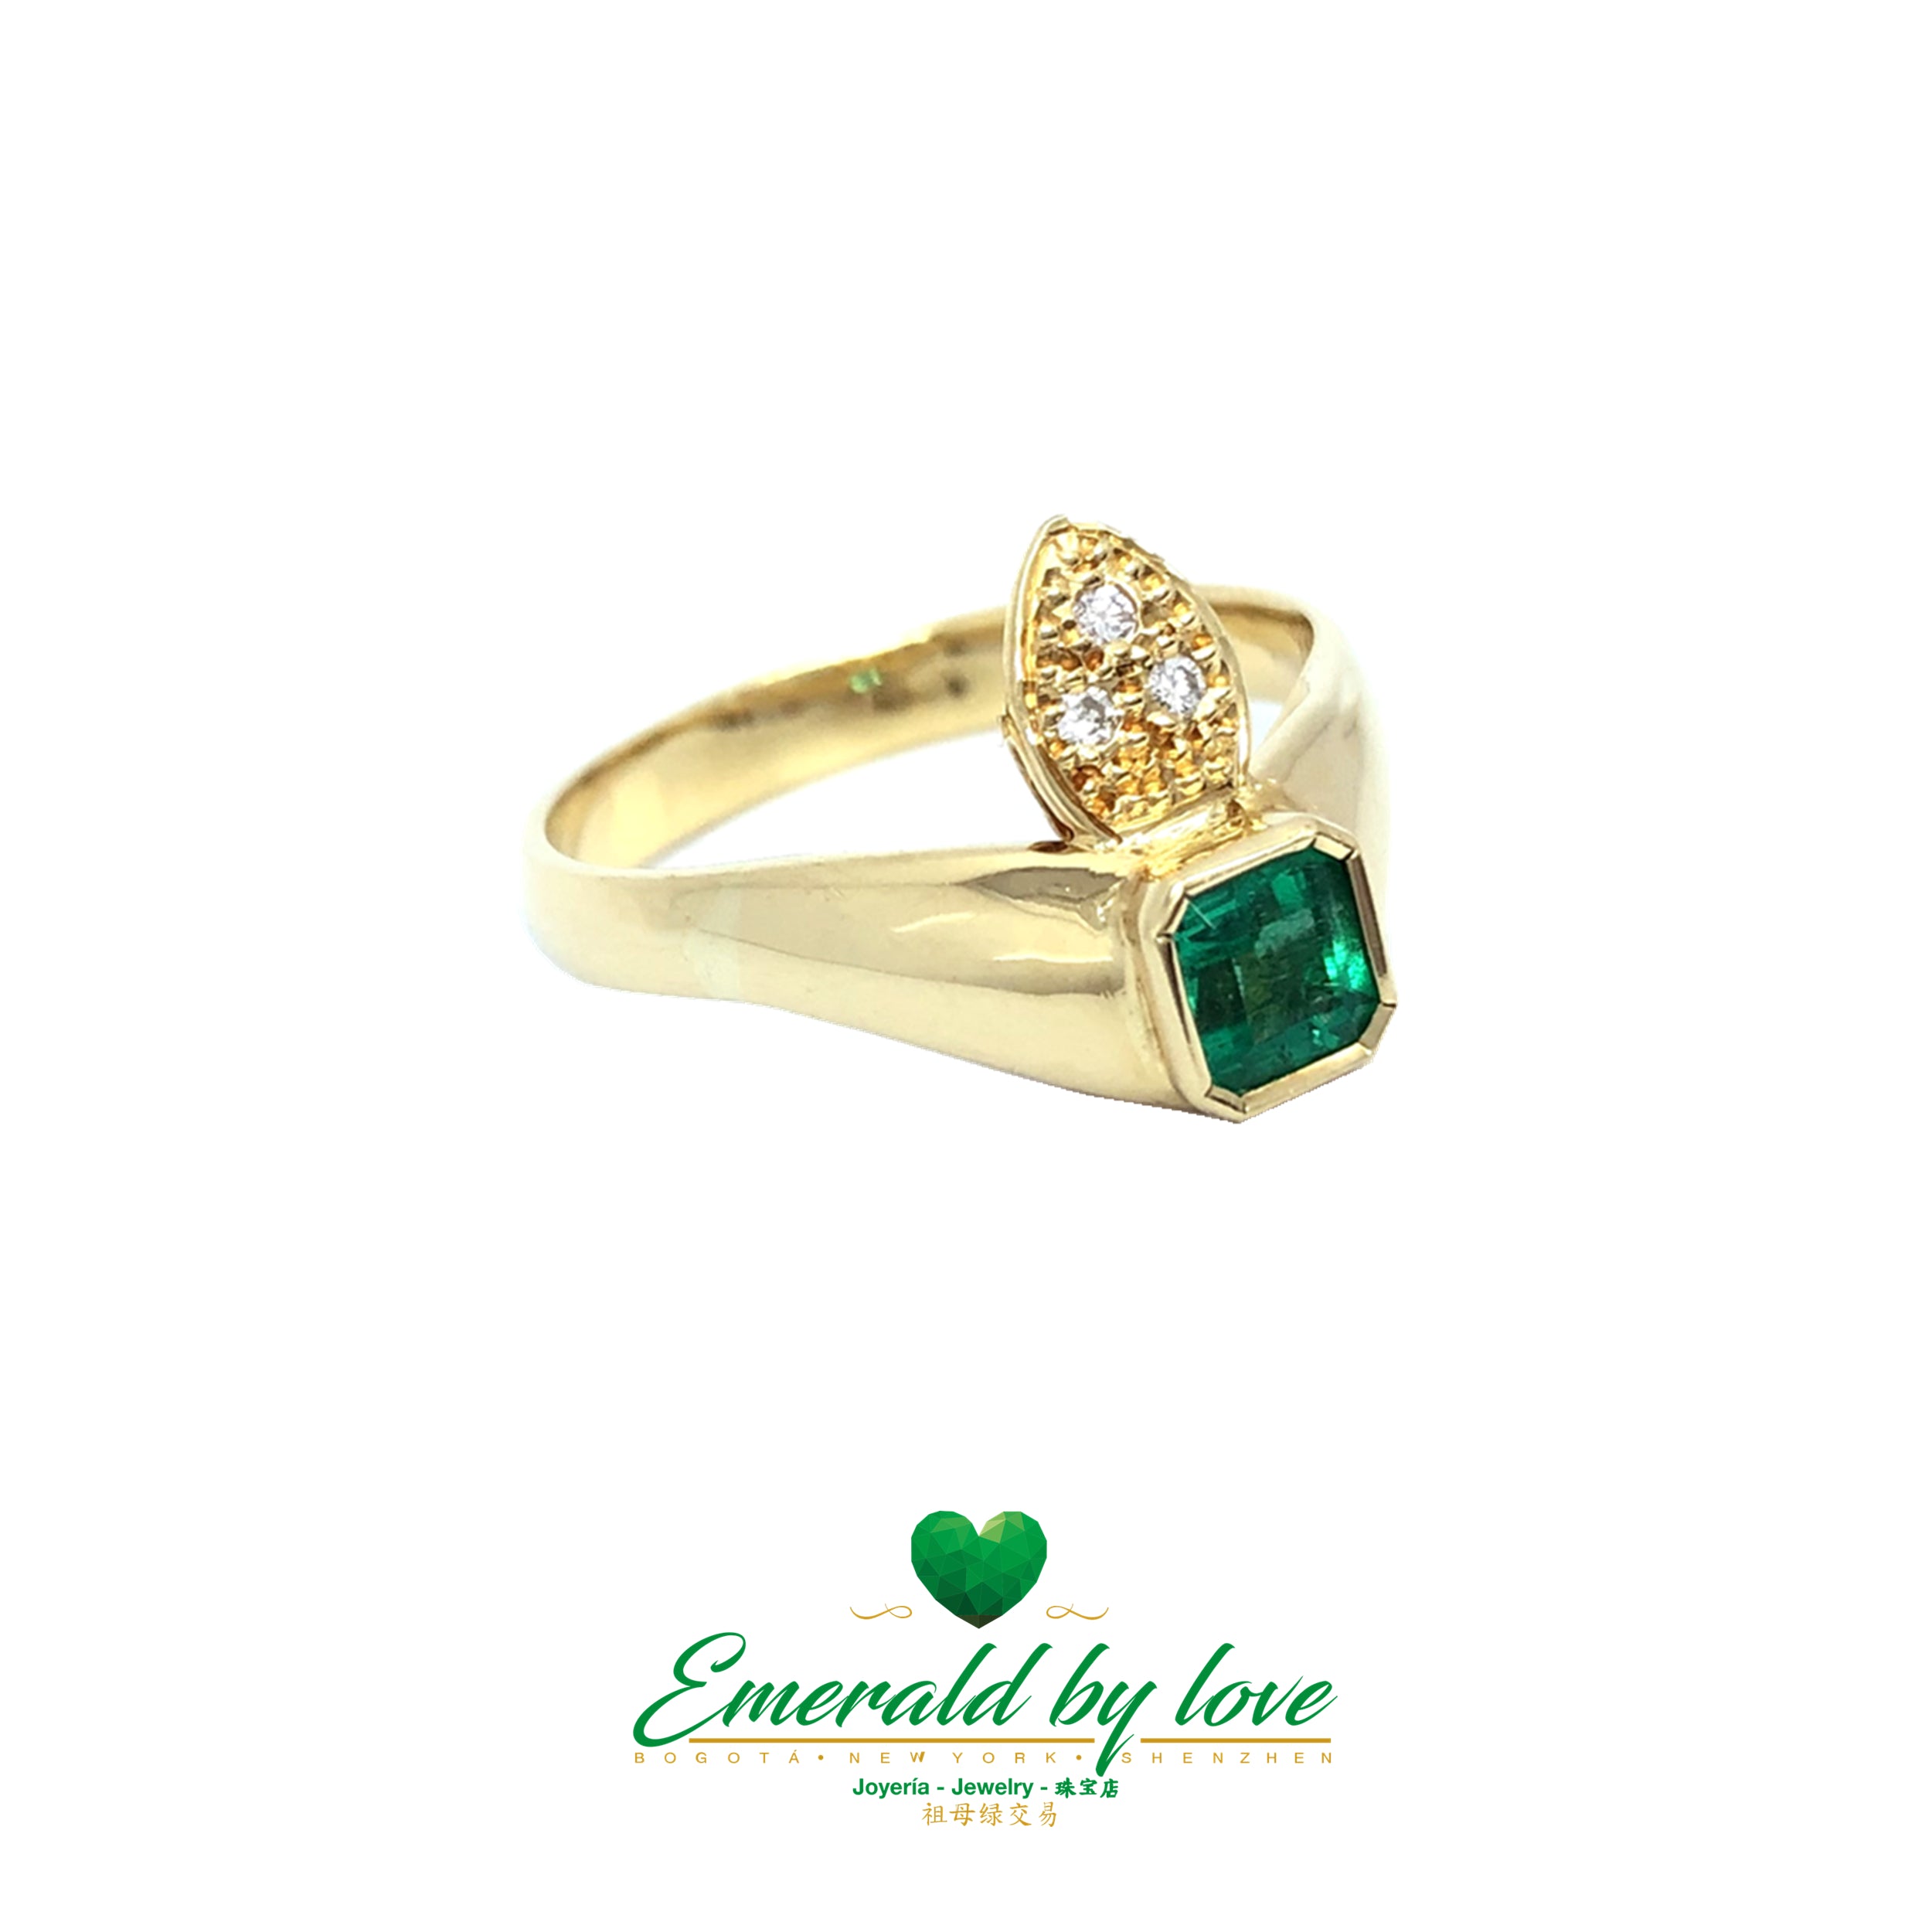 Amazing Colombian Emerald Ring in 18k yellow gold